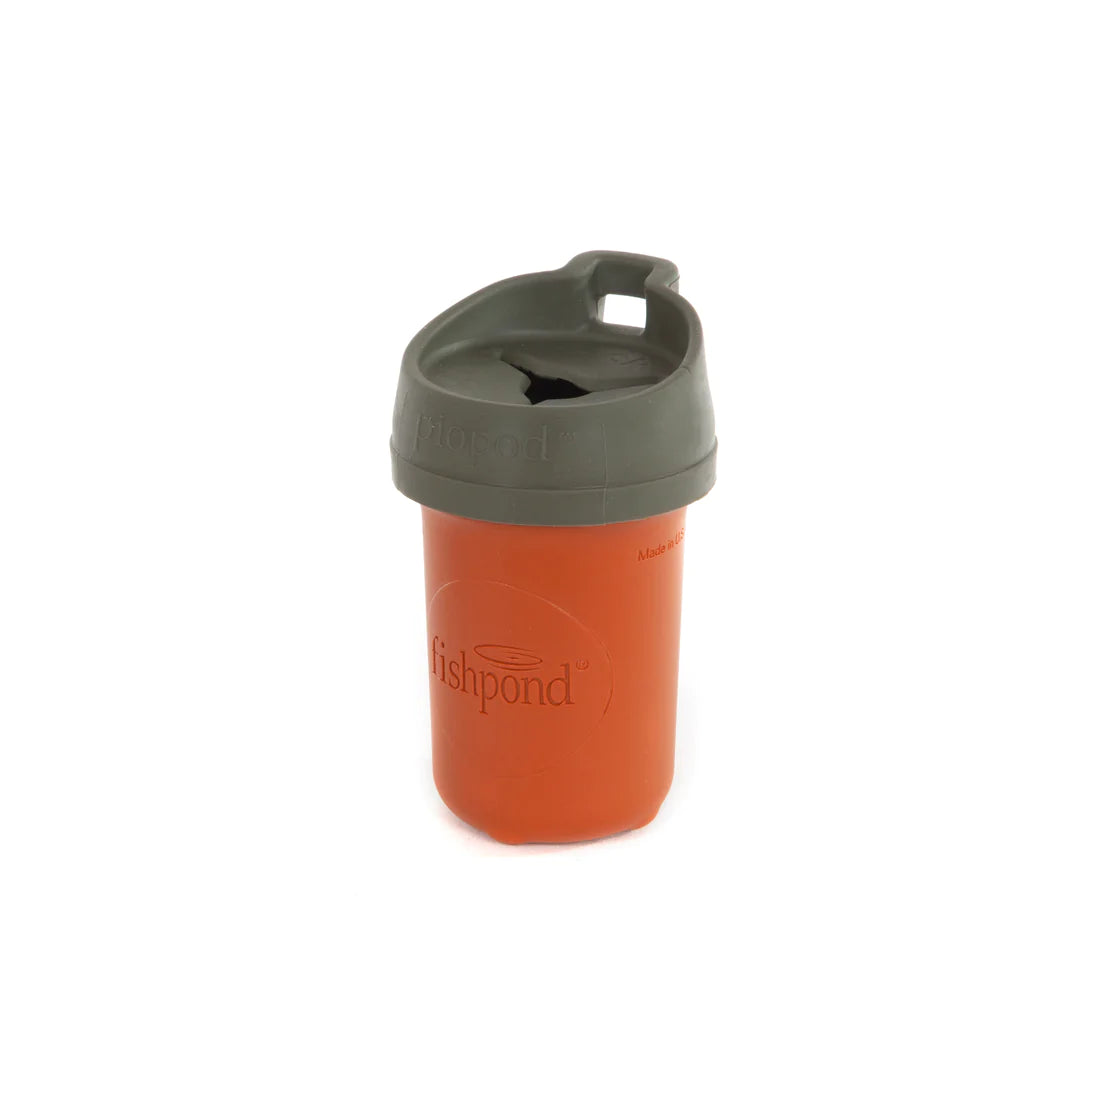 Fishpond PIOPOD Microtrash Container- Cutthroat Orange